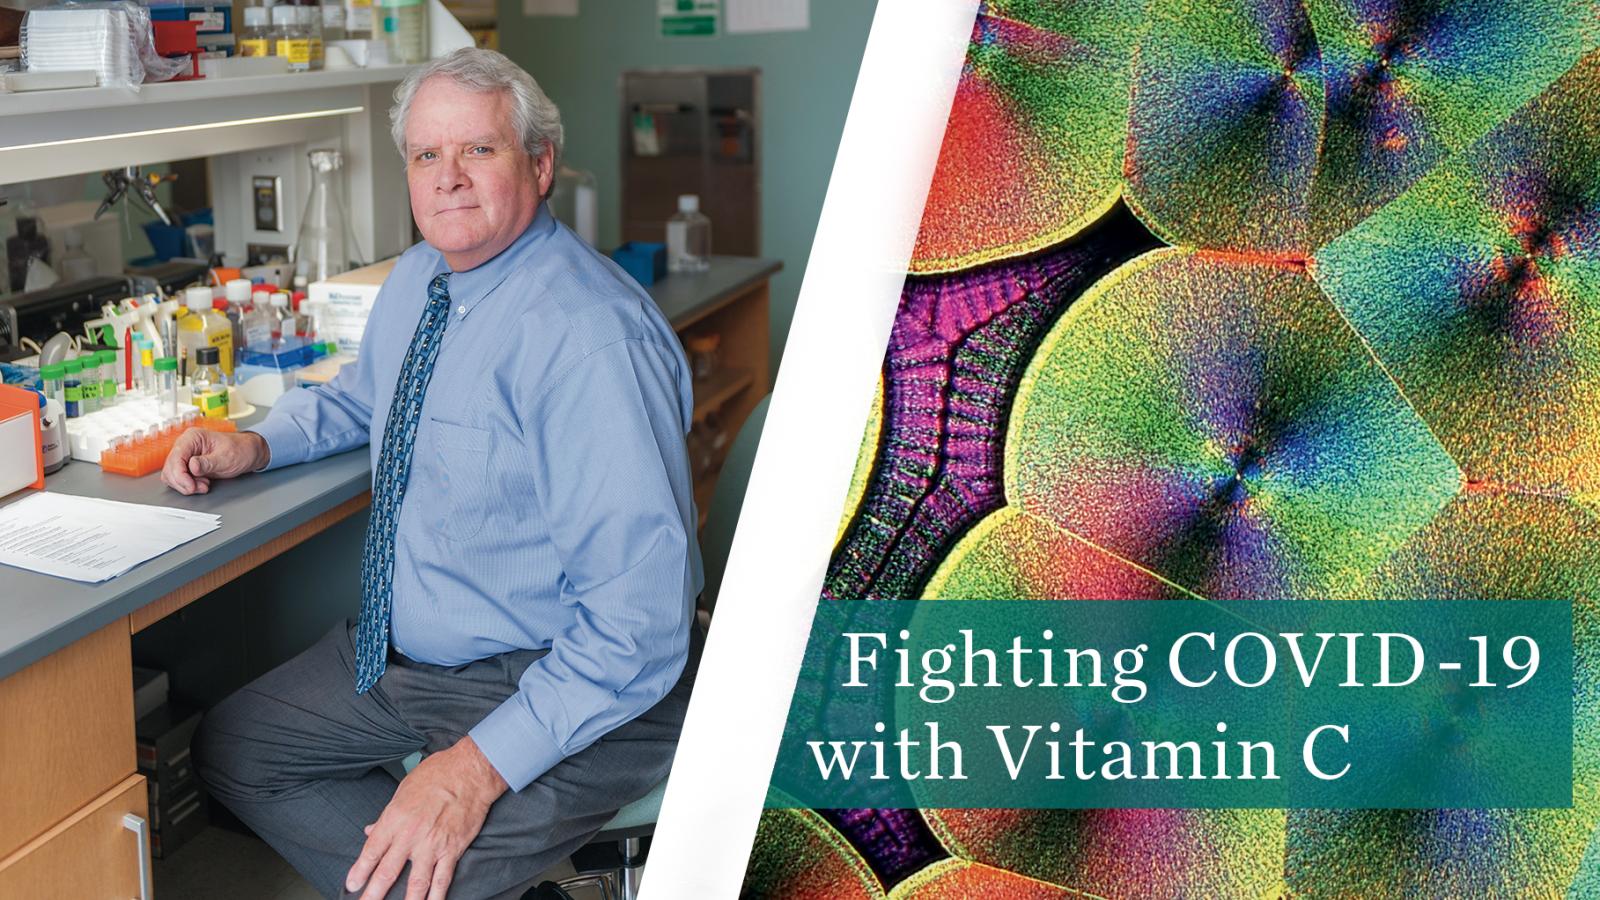 Berry Folwer will research how Vitamin C might be used to treat patients with COVID-19